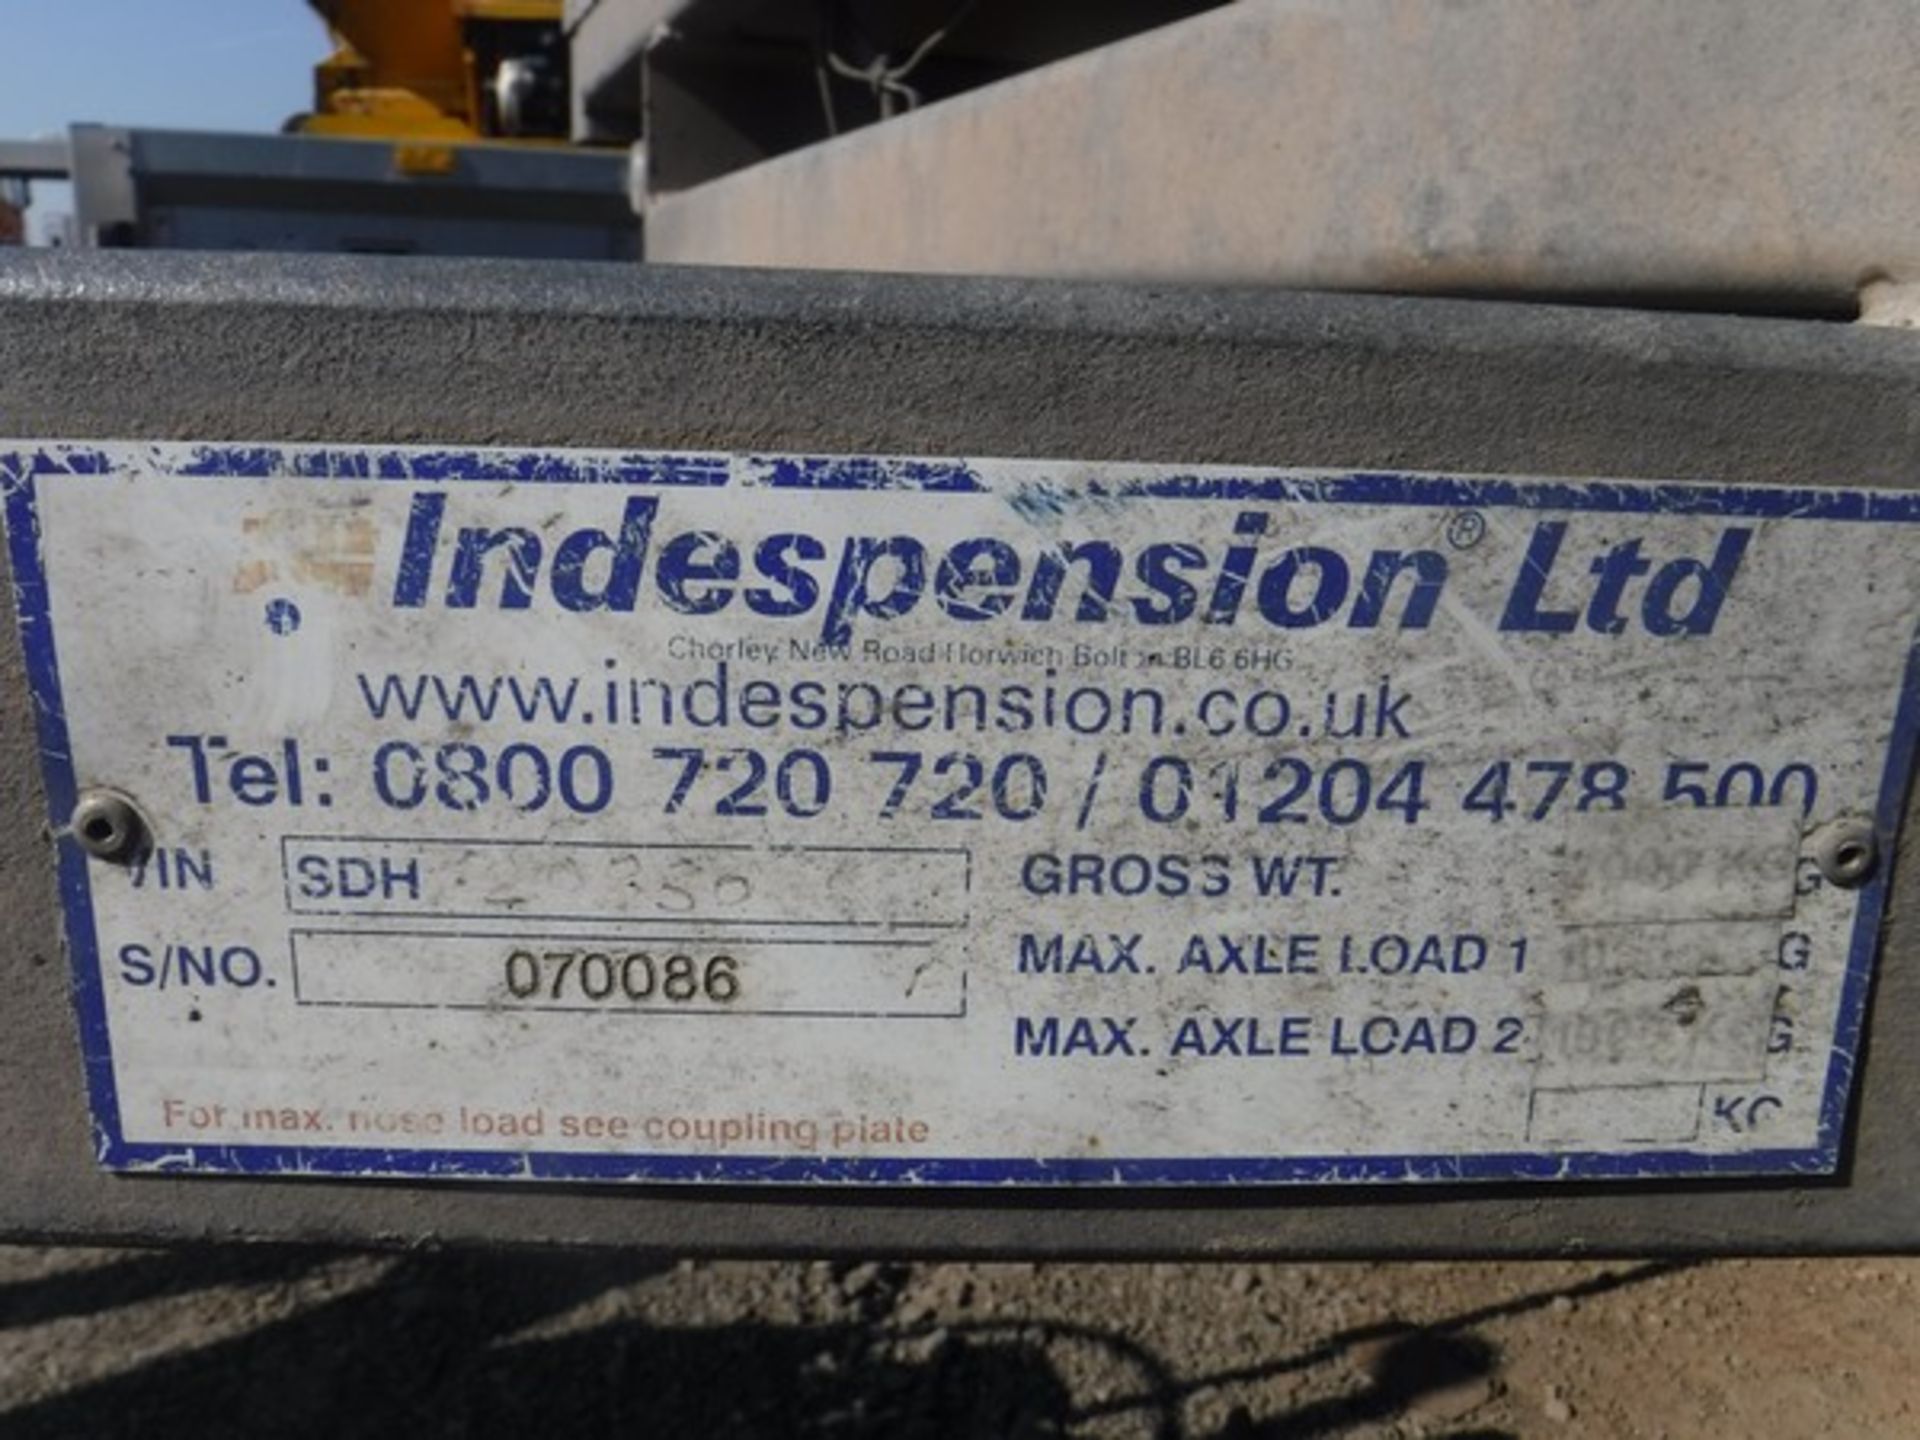 INDESPENSION trailer. S/N 070086. Twin axle 8ft x 5ft, drop tailgate with cover. Asset no 758-4029. - Bild 6 aus 6